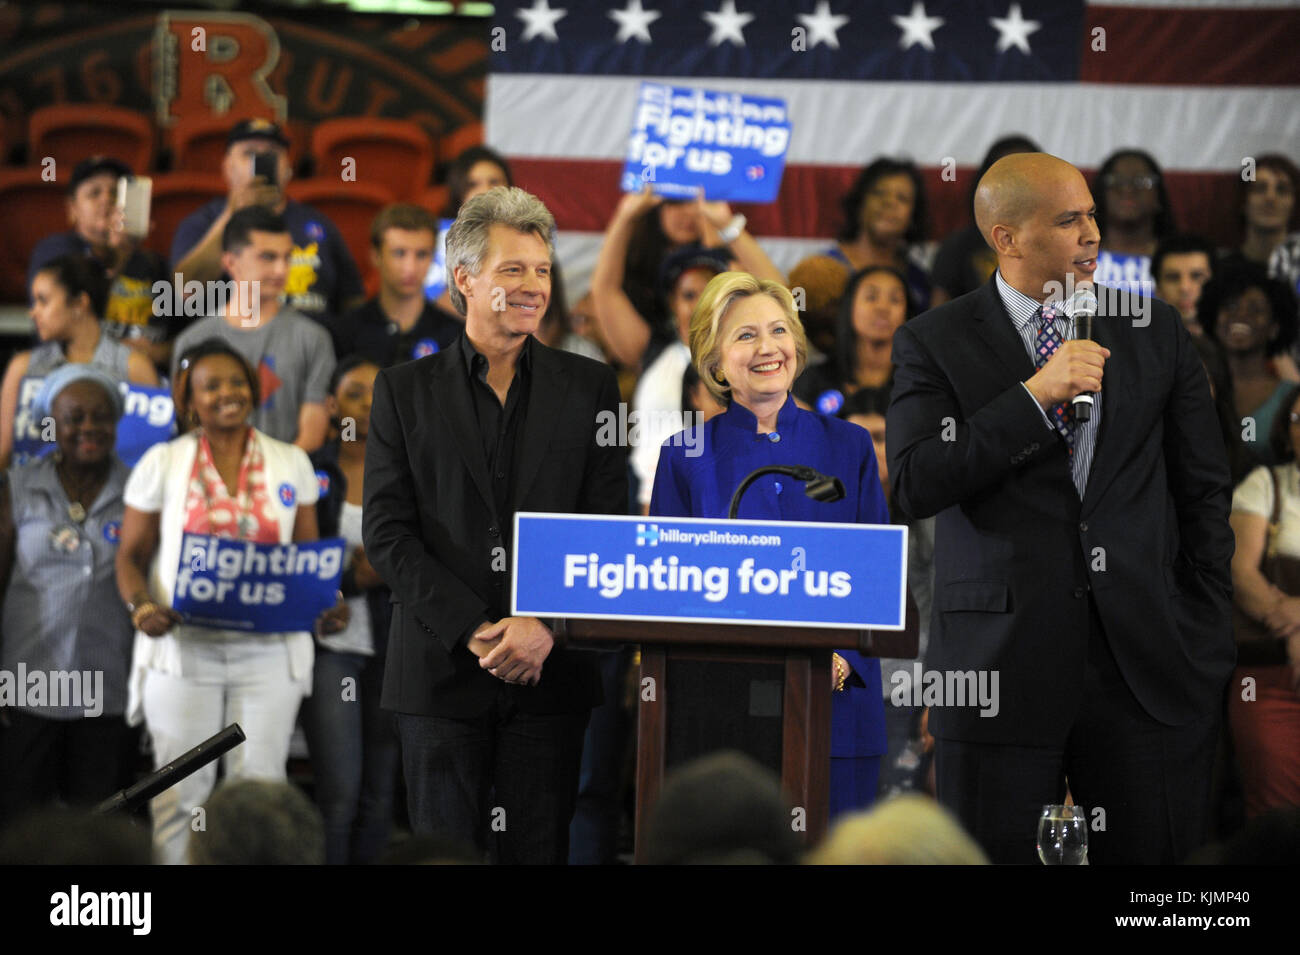 NEWARK, NJ - JUNE 01: Democratic presidential candidate Hillary Clinton speaks at a rally on June 1, 2016 in Newark, New Jersey. Clinton will head back to California tomorrow where she is in a tight race with Democratic challenger Sen. Bernie Sanders (D-VT)  People:  Jon Bon Jovi, Hillary Clinton, Cory Booker Stock Photo